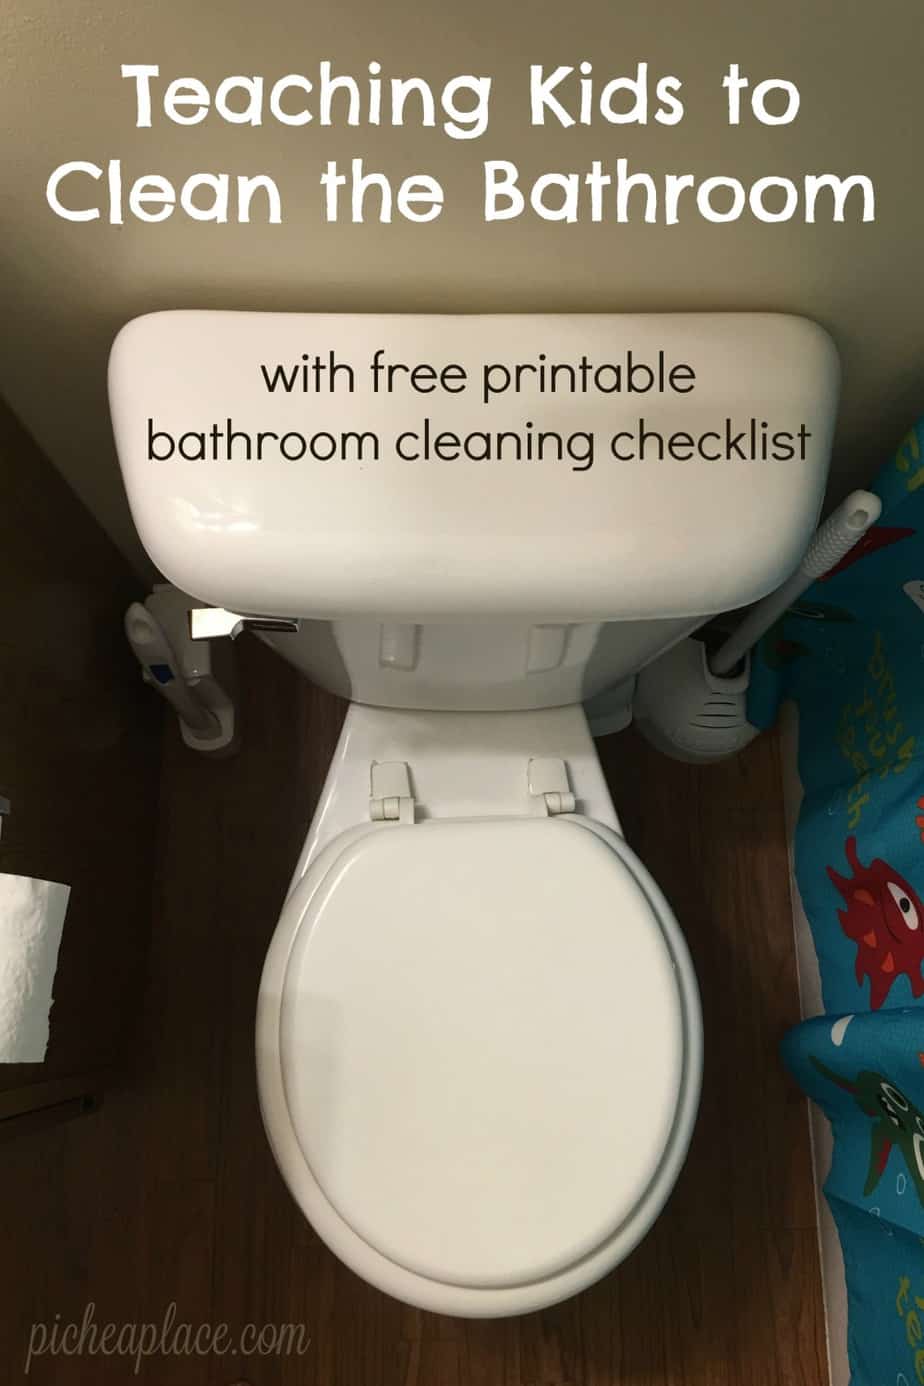 Sending your kids in to clean the bathroom can be a risky move, but when you arm them with the knowledge and tools they need, you can successfully hand over the bathroom cleaning duties. Here are a few tips for teaching kids to clean the bathroom, plus a free printable bathroom cleaning checklist.